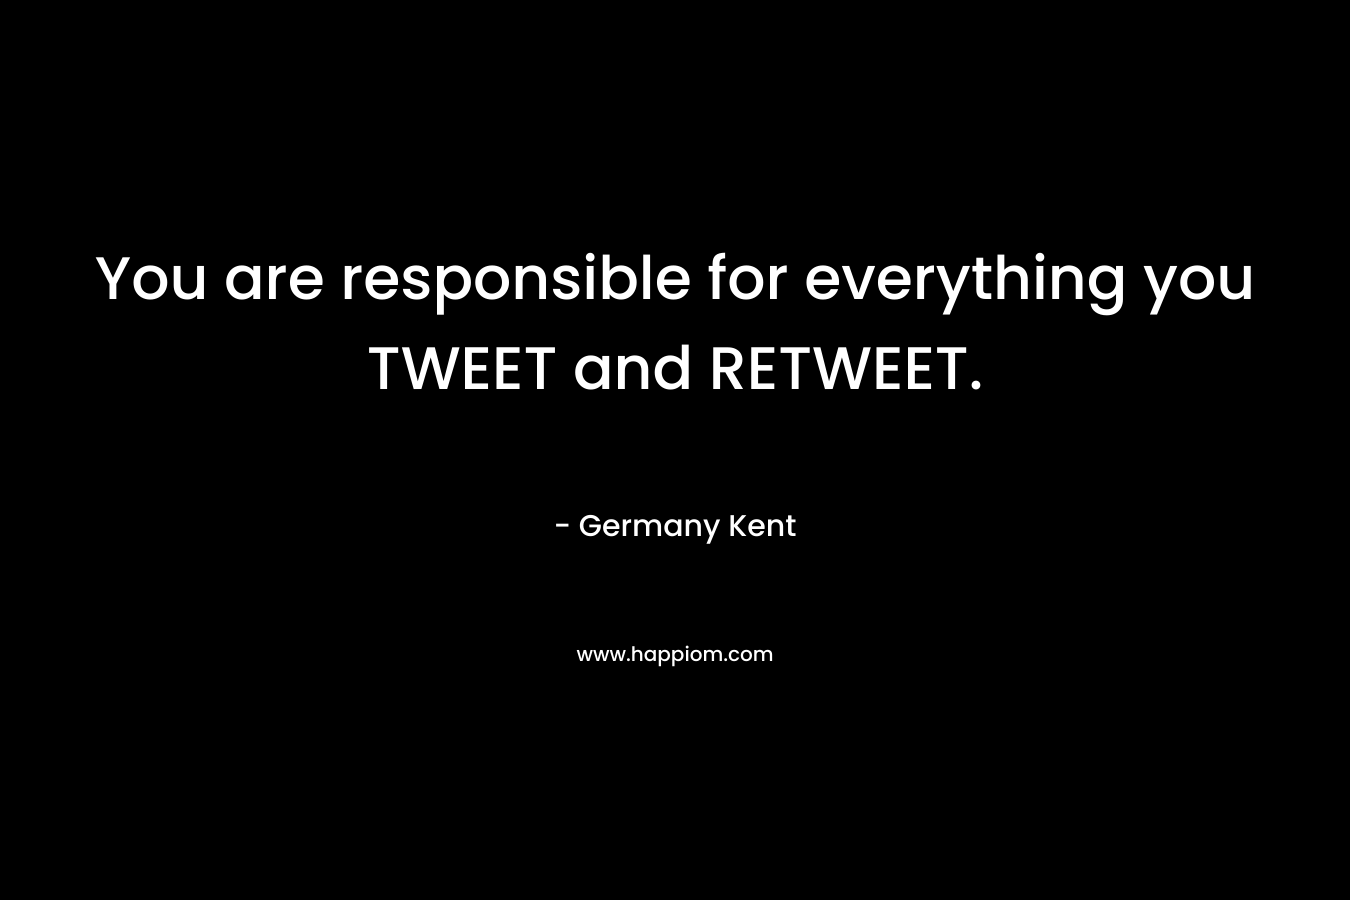 You are responsible for everything you TWEET and RETWEET.